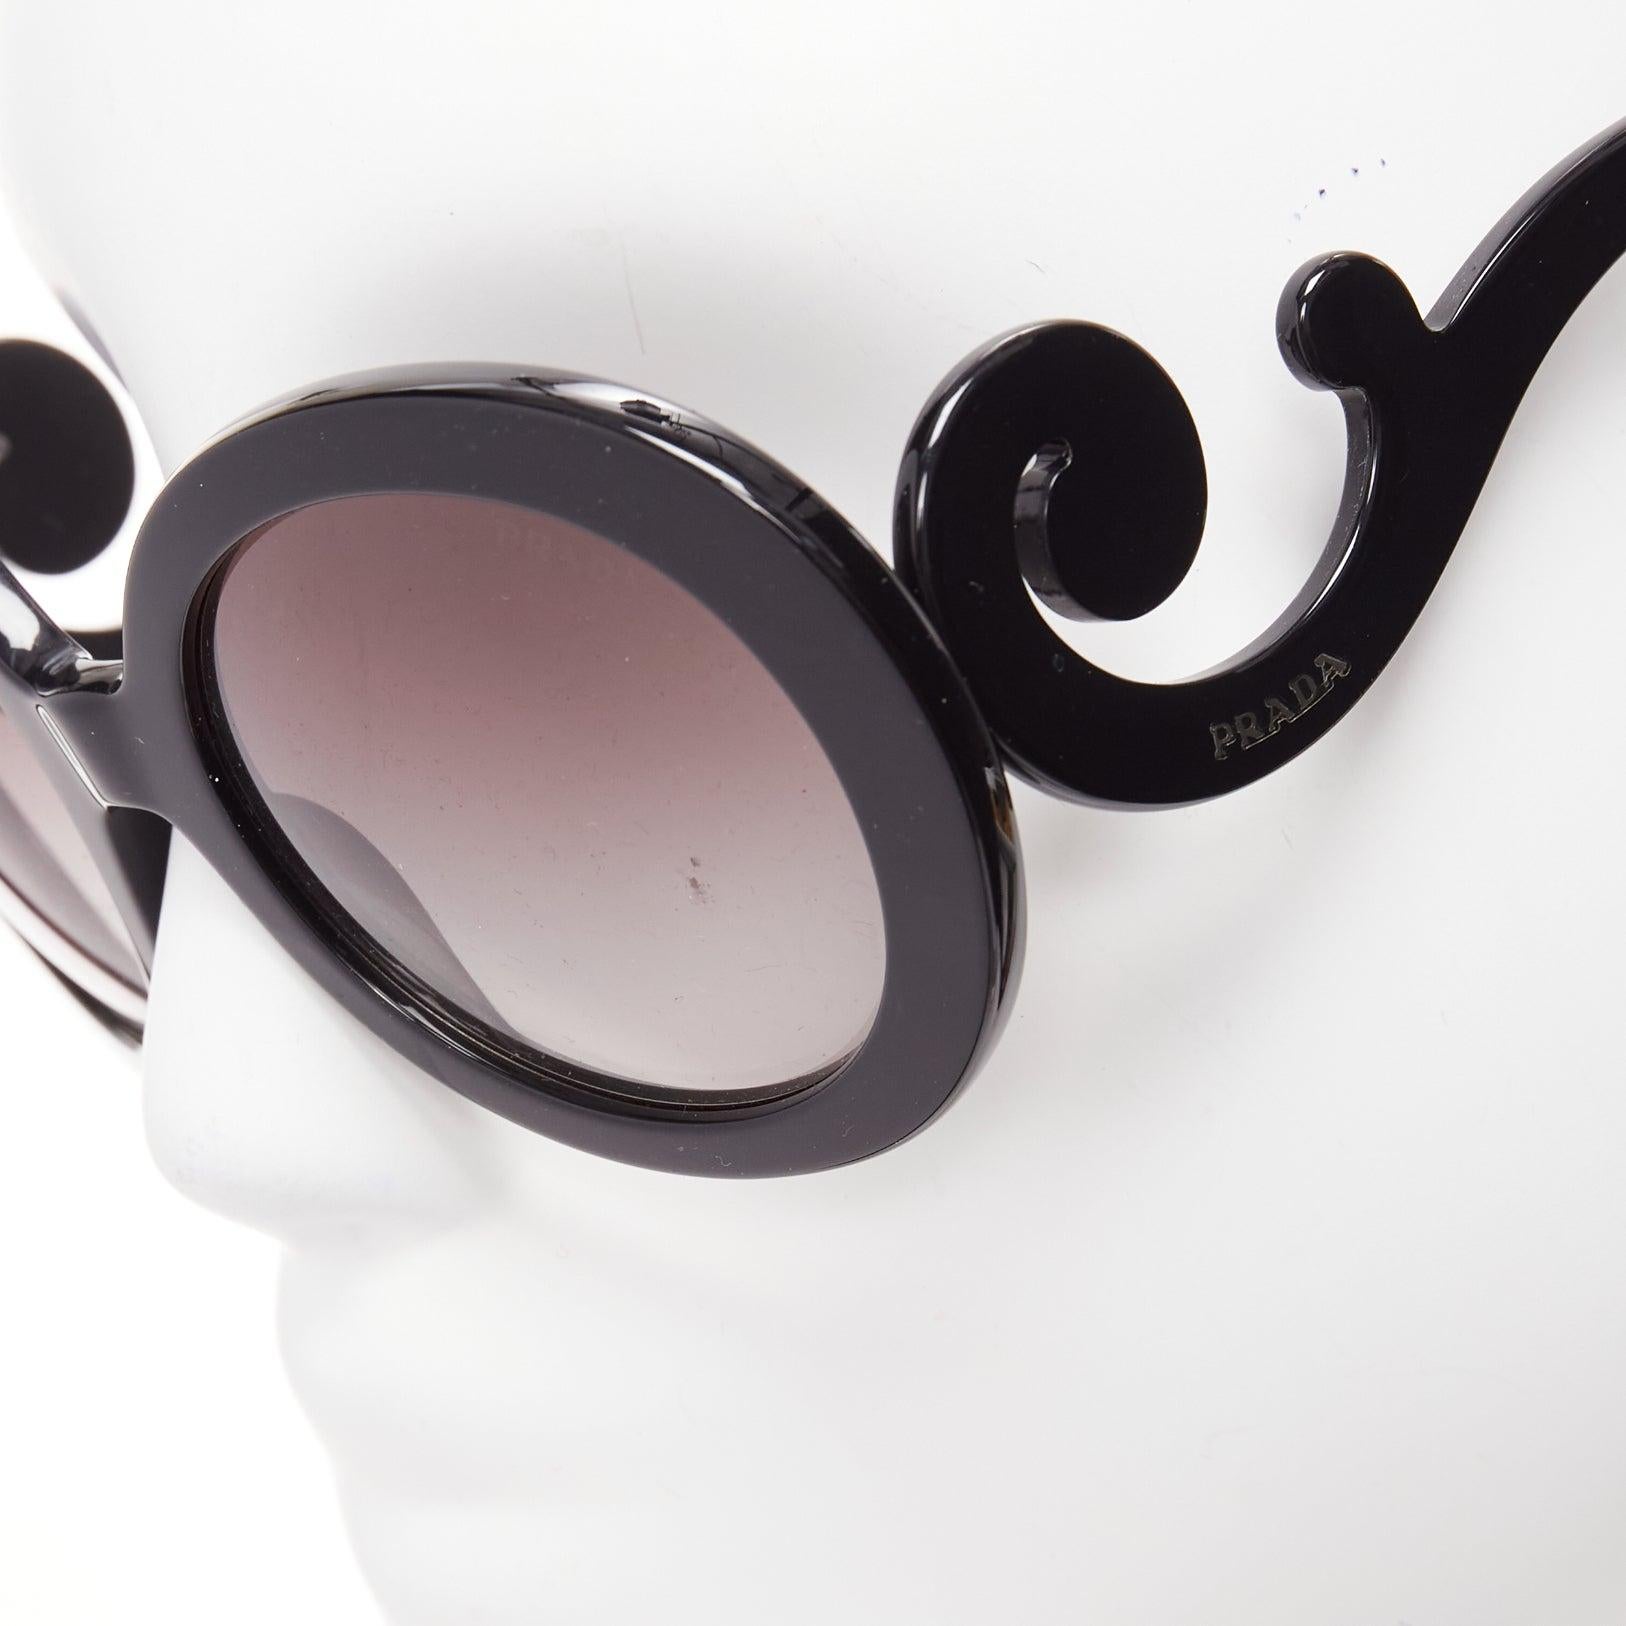 PRADA SPR27N black swirl temple logo round oversized sunglasses
Reference: AAWC/A01020
Brand: Prada
Designer: Miuccia Prada
As seen on: Mary-kate Olsen
Material: Acetate
Color: Black
Pattern: Solid
Lining: Black Acetate
Extra Details: Logo at